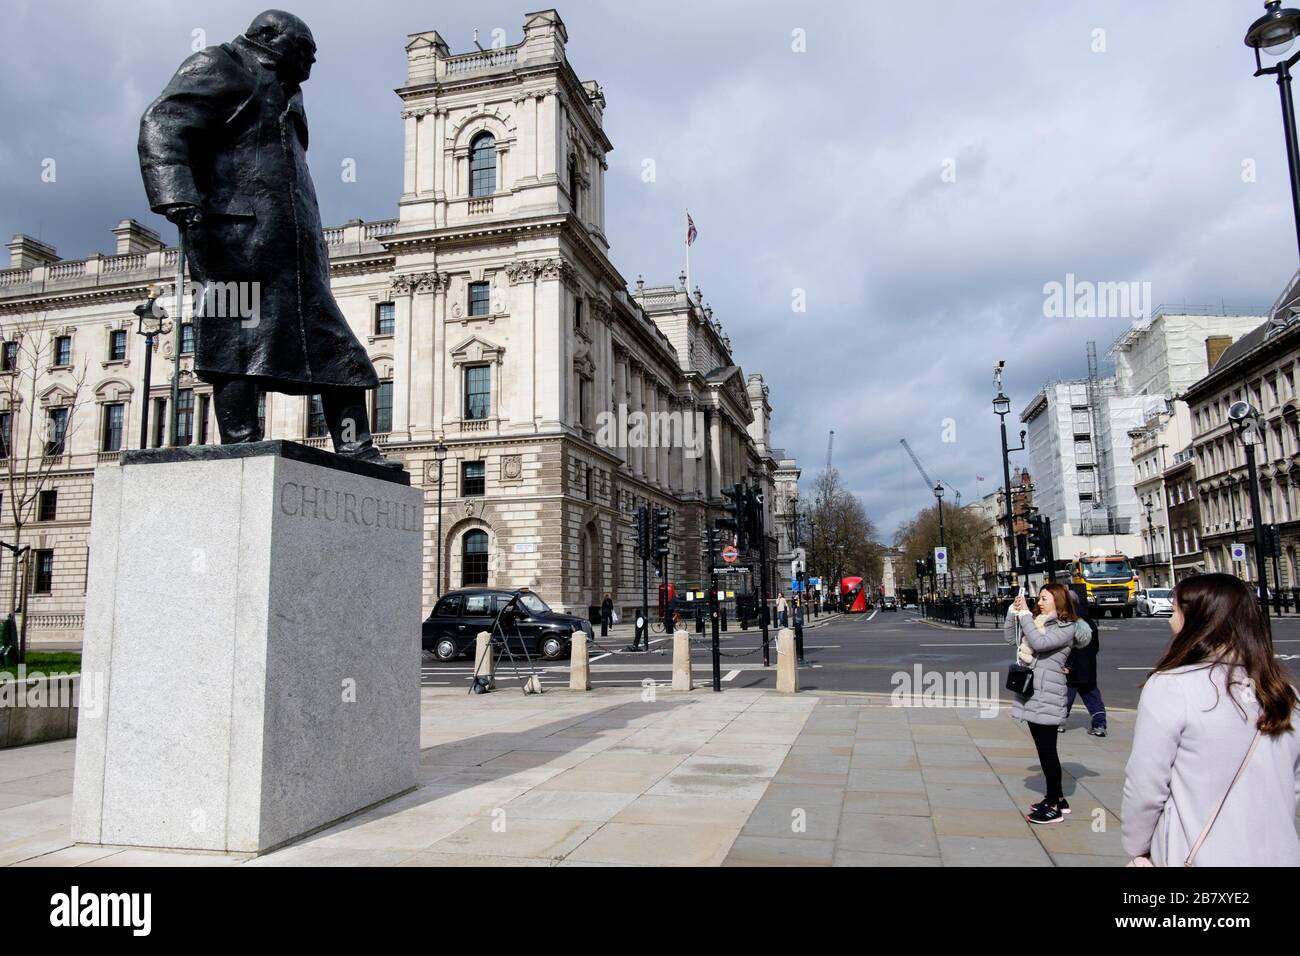 London, UK 18 March 2020. A statue of former British Prime Minister, Winston Churchill overlooks an unusually deserted Parliament Square. Stock Photo